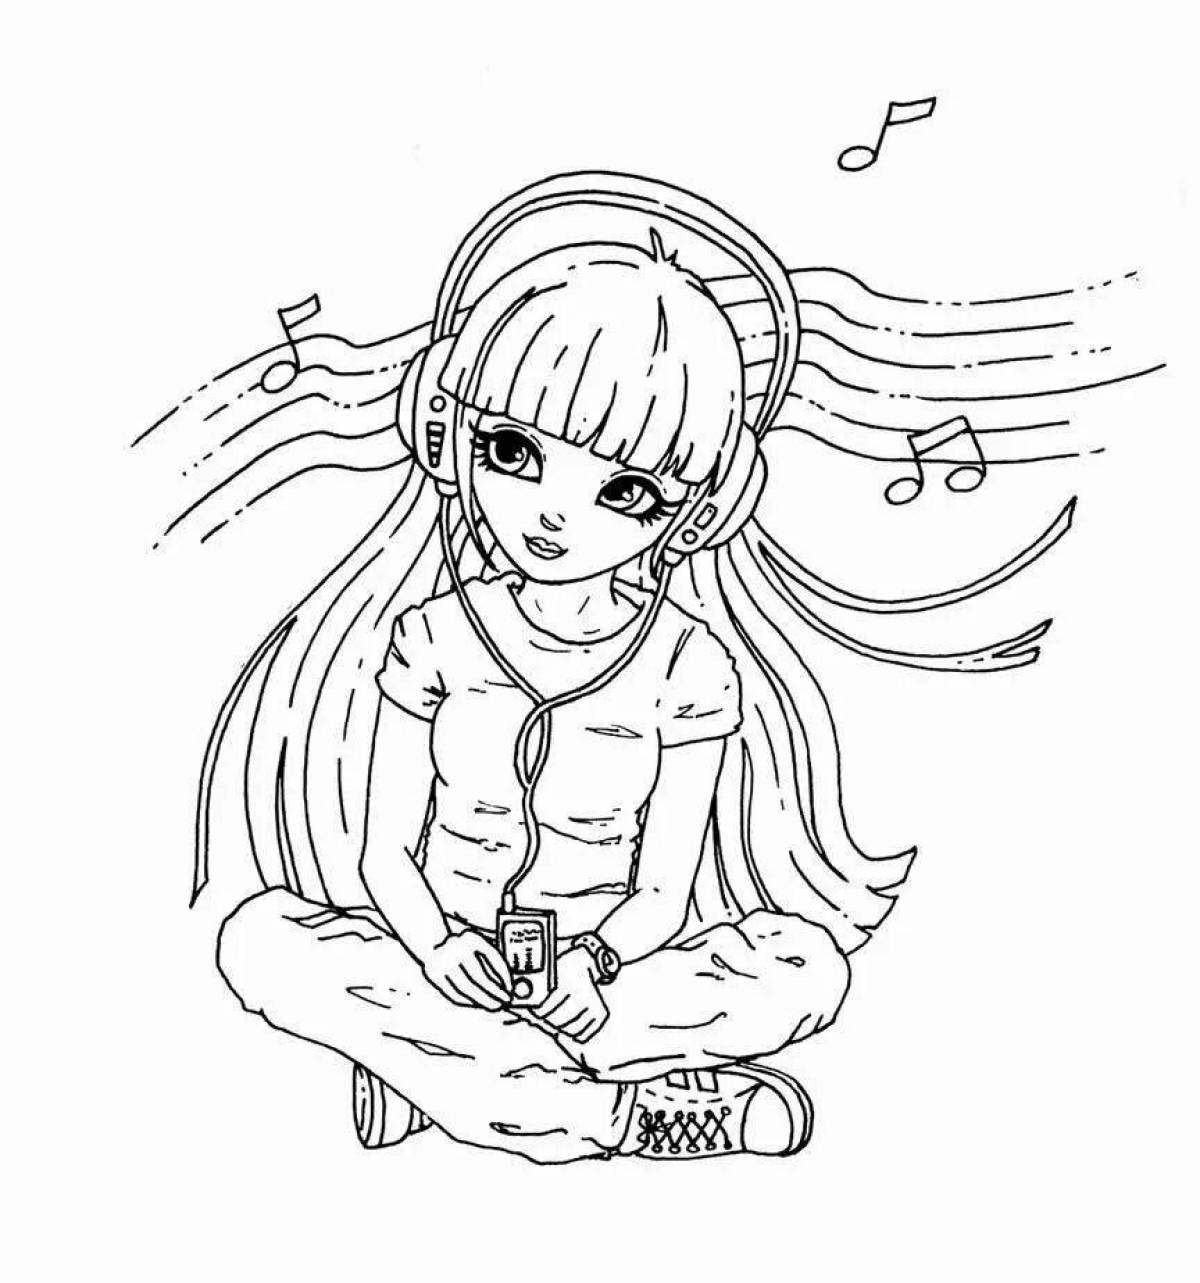 Exotic coloring girl with headphones